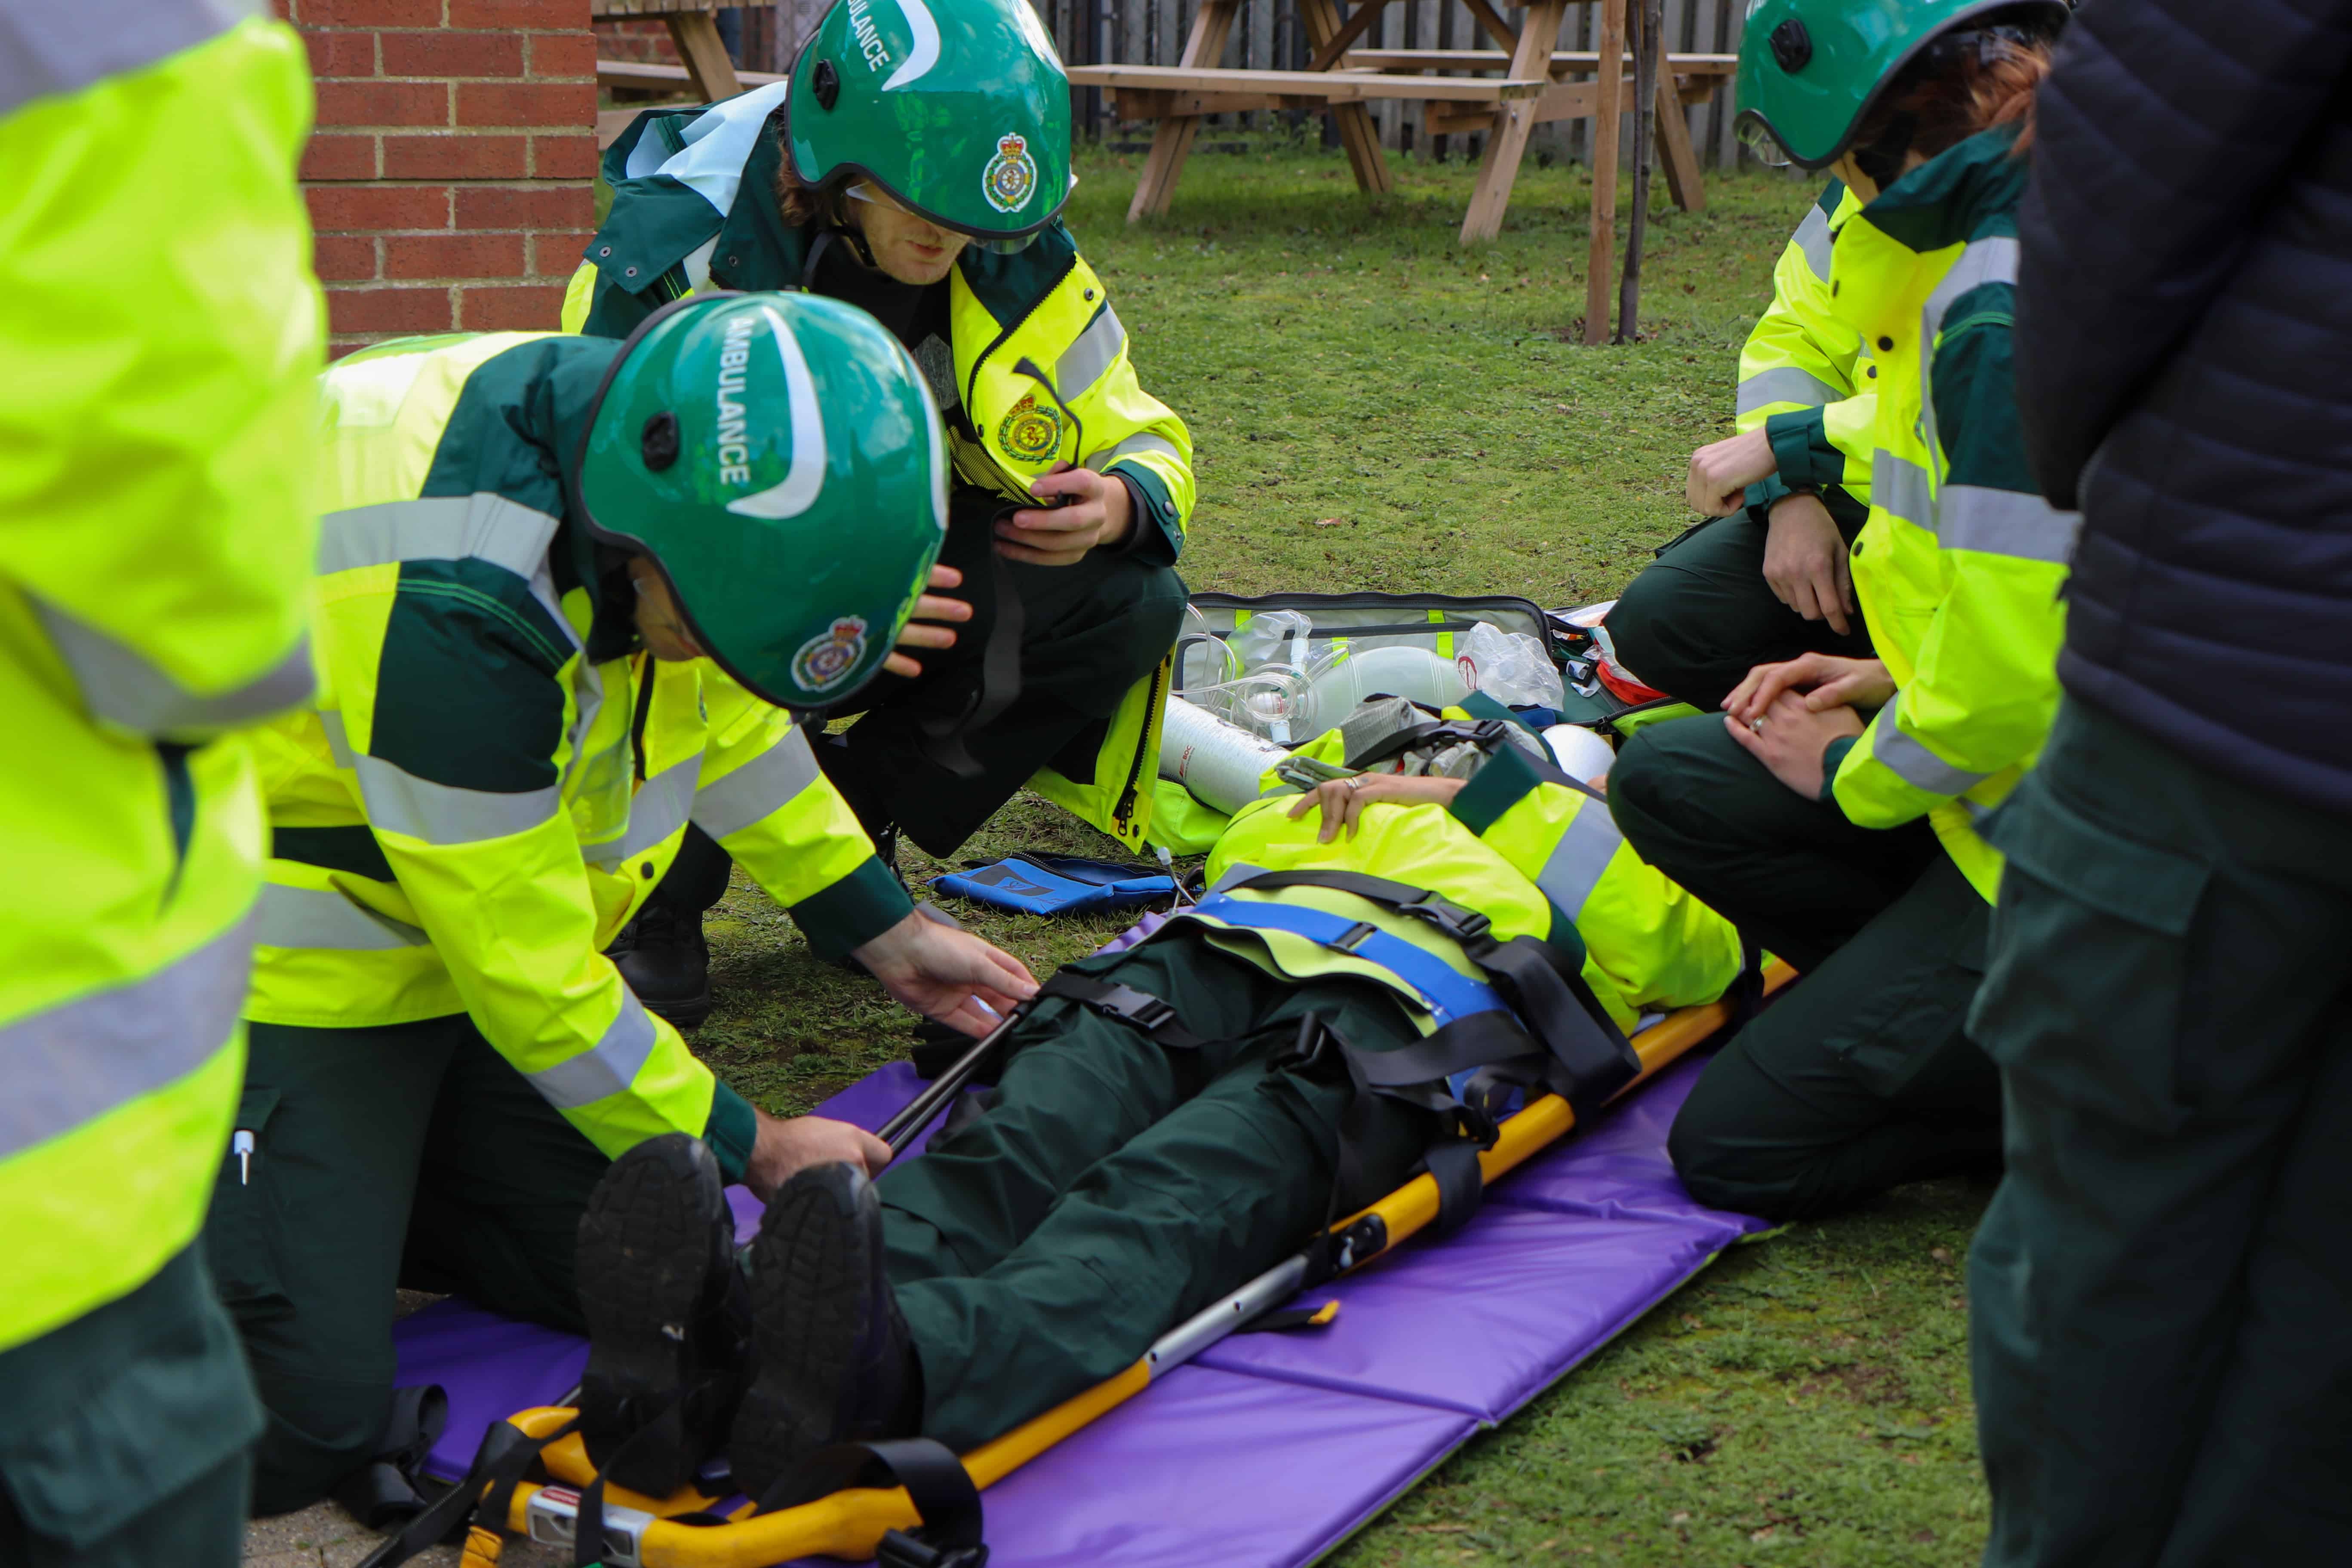 A trauma scenario being led by our Newmarket tutor Helen Smith